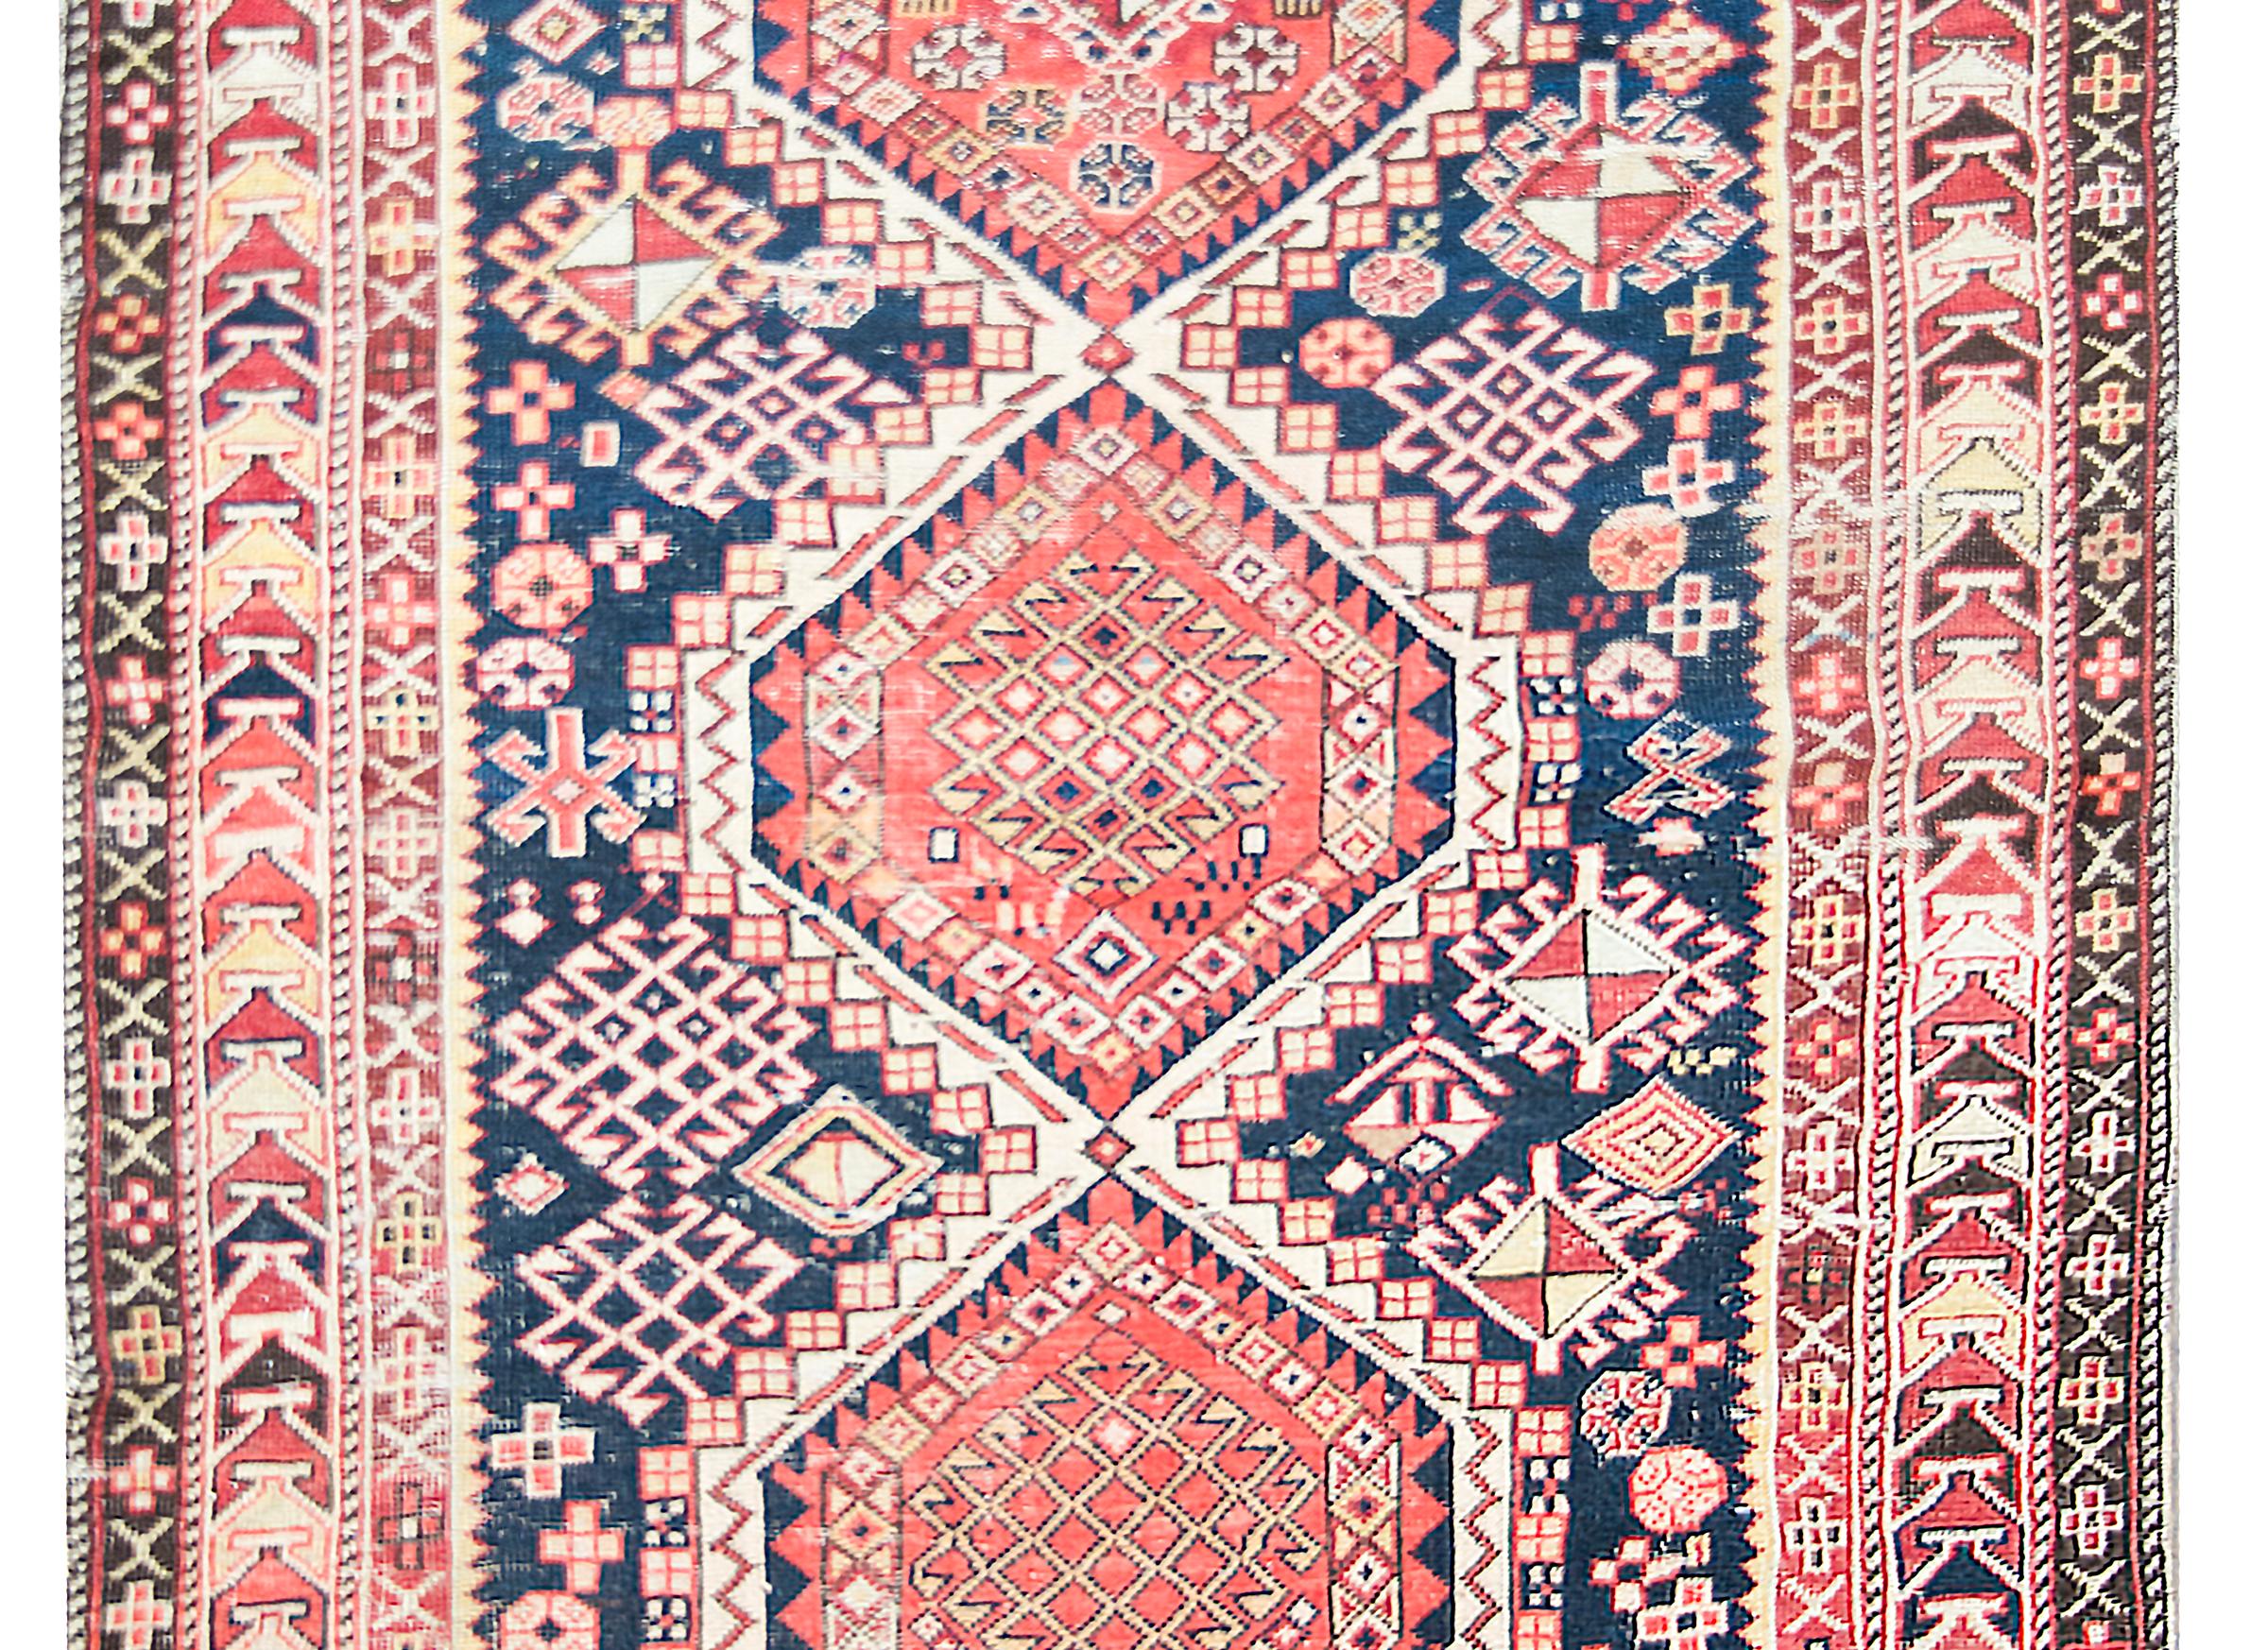 An exciting early 20th century Persian Shrivan rug with three large central diamond medallions  with myriad stylized floral patterns, living amidst a field of even more stylized flowers, and surrounded by the most beautiful border composed of three